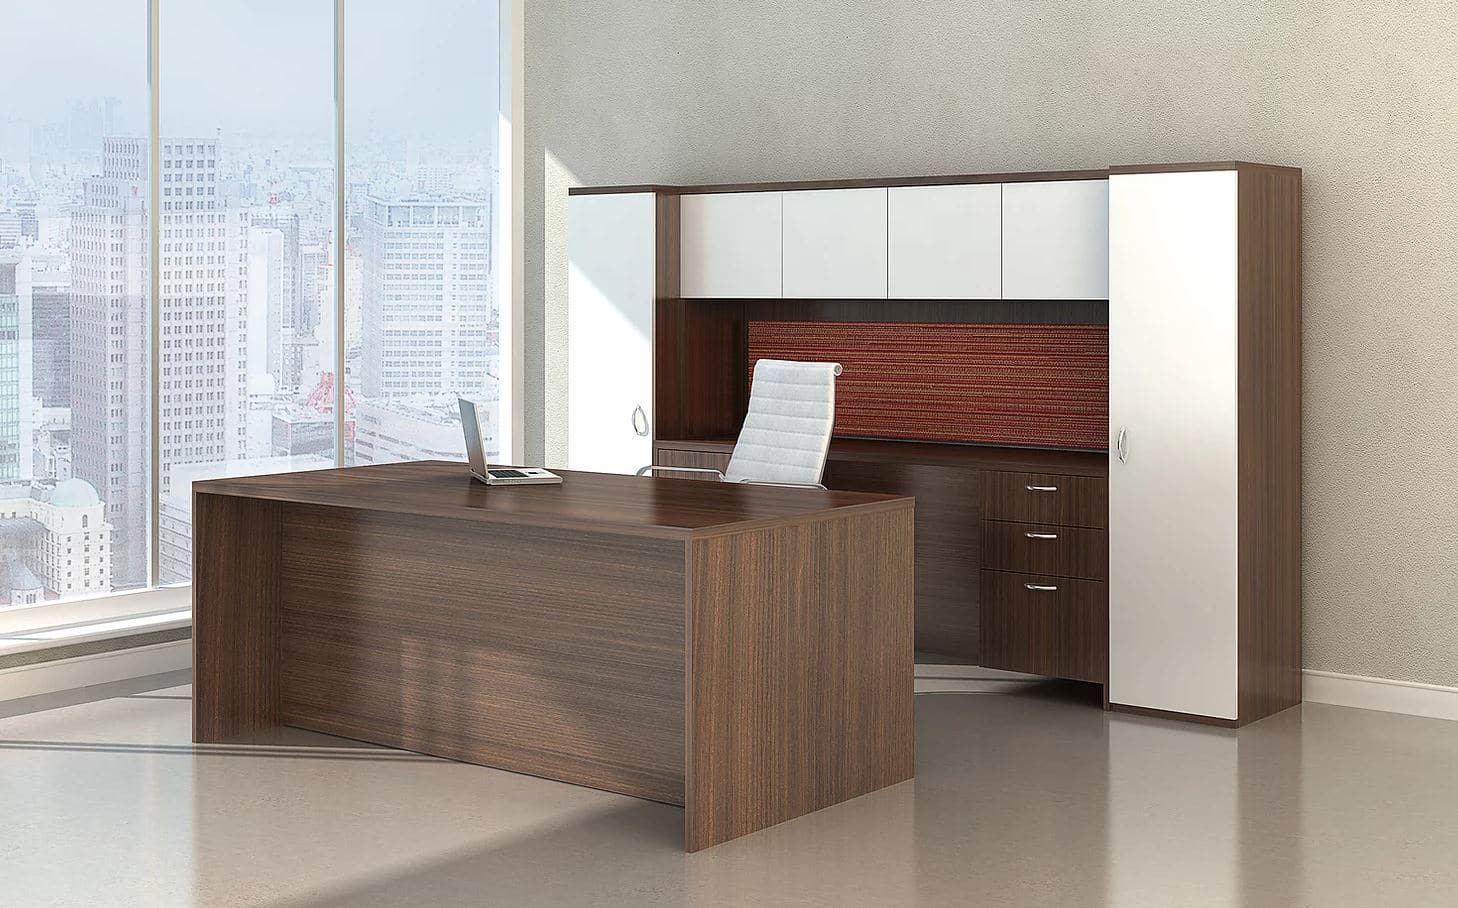 maverick series desk with credenza hutch and wardrobe storage on each side